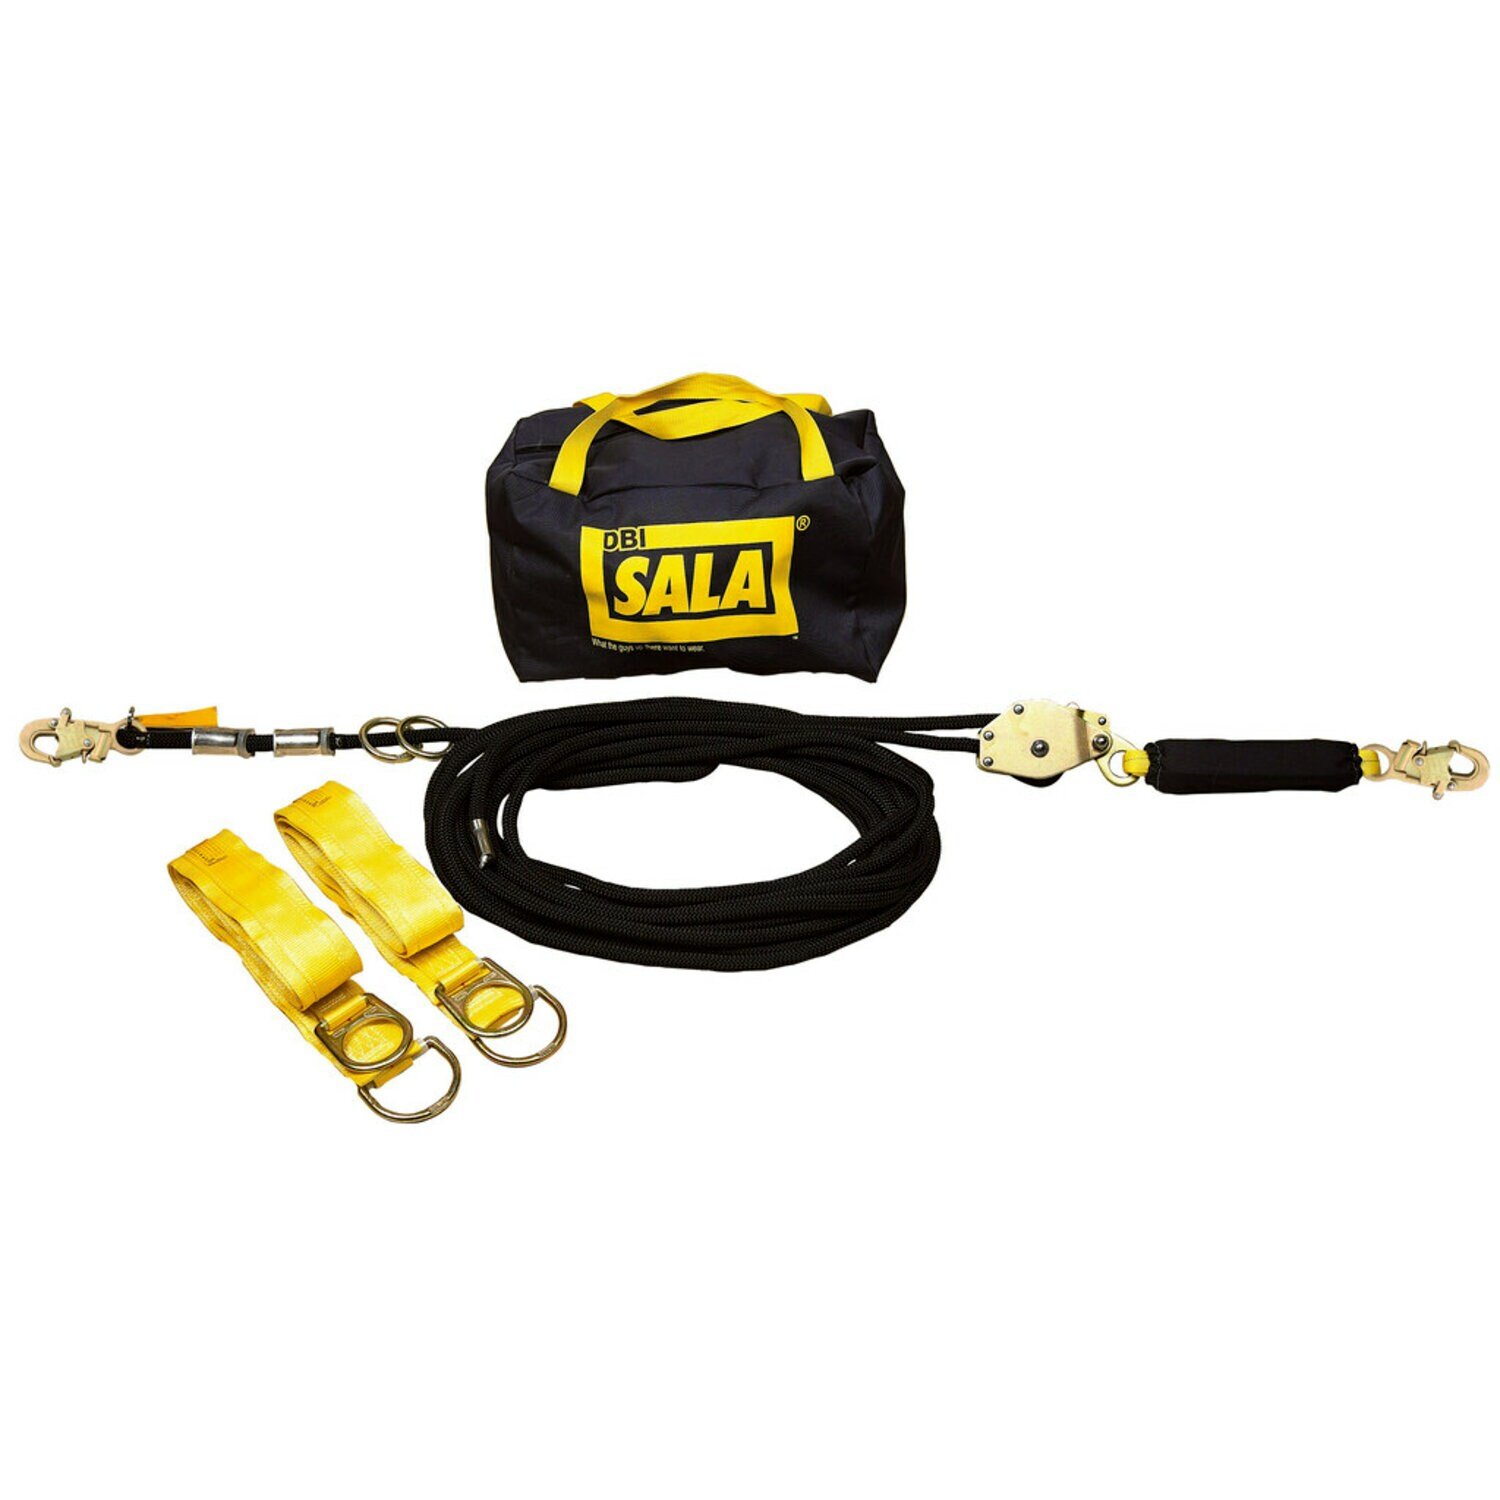 7012820306 - 3M DBI-SALA Temporary Horizontal Lifeline System with Anchors 7600704, 11/16 in Nylon Kernmantle Rope, 50 ft